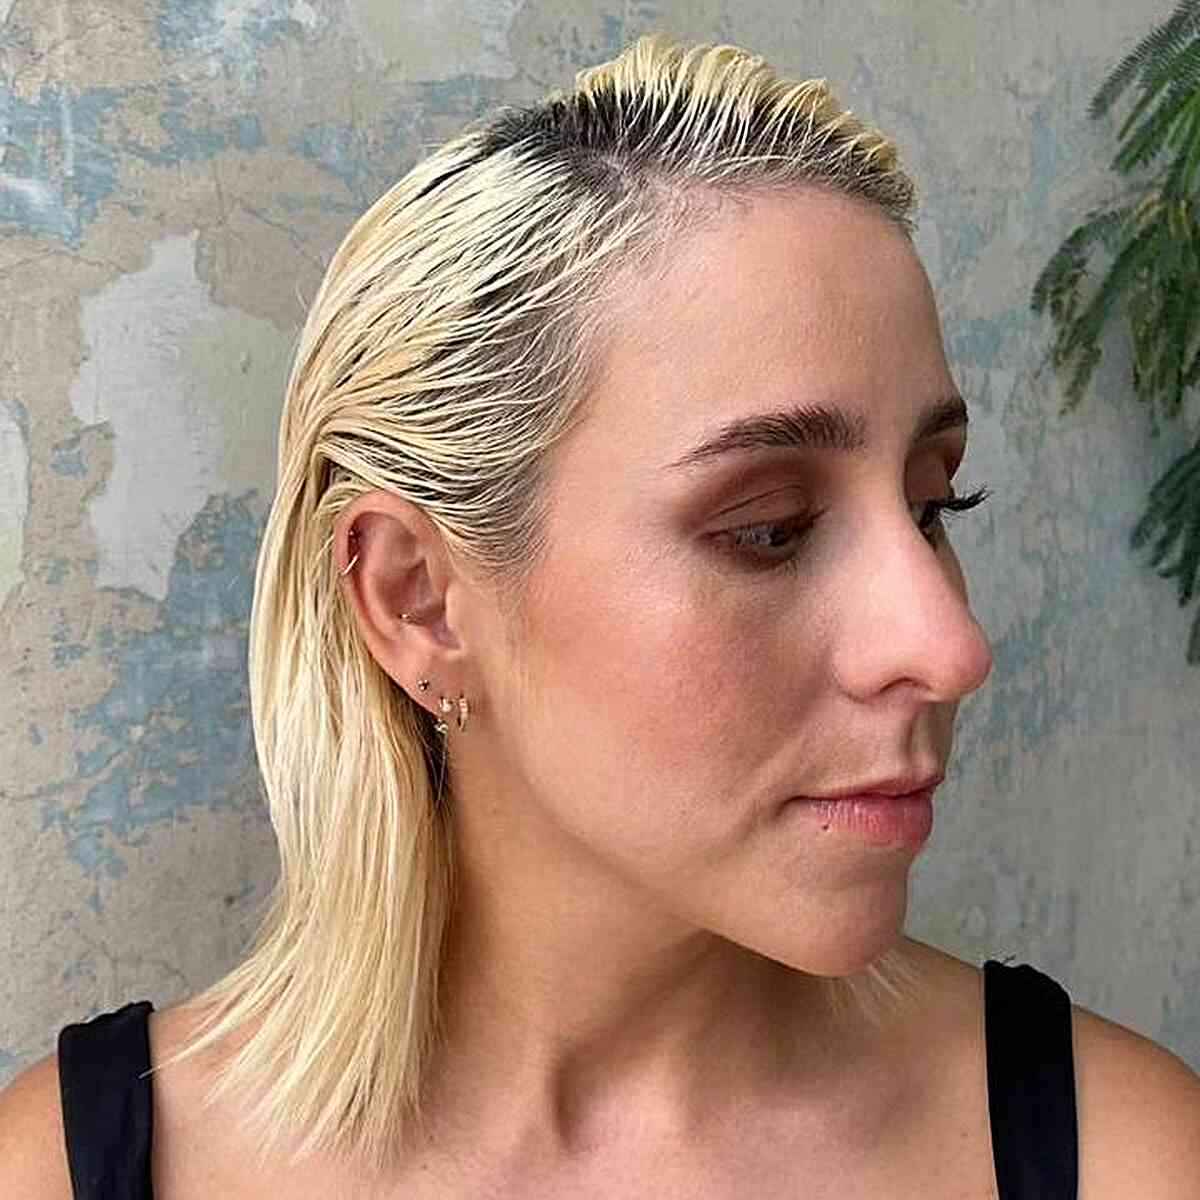 Collarbone-Length Side Part Wet Look with Choppy Ends